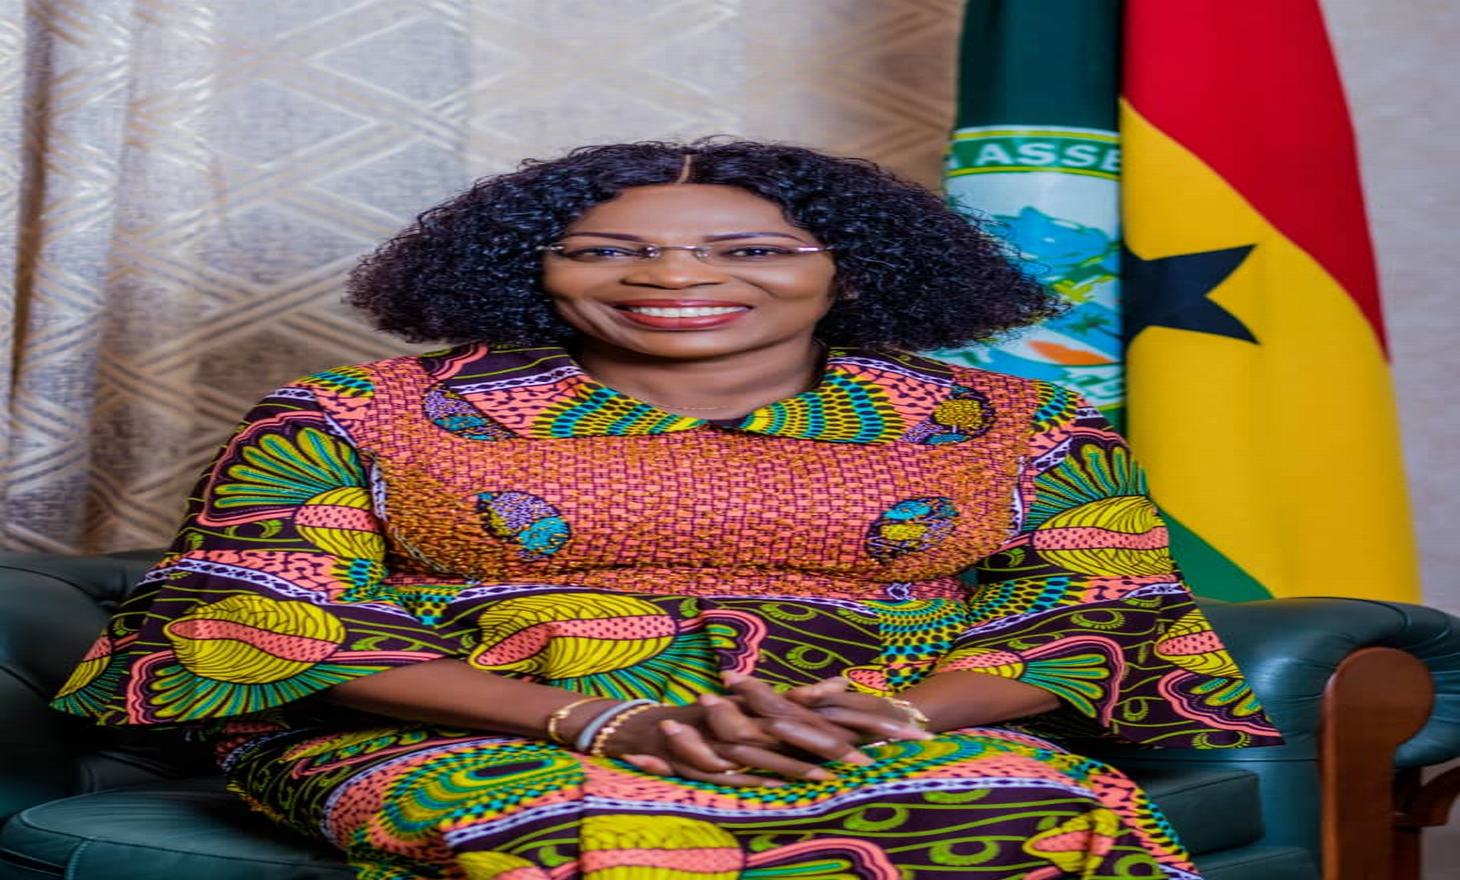 Mayor of Accra encourages women to embrace virtues in pursuing leadership opportunities